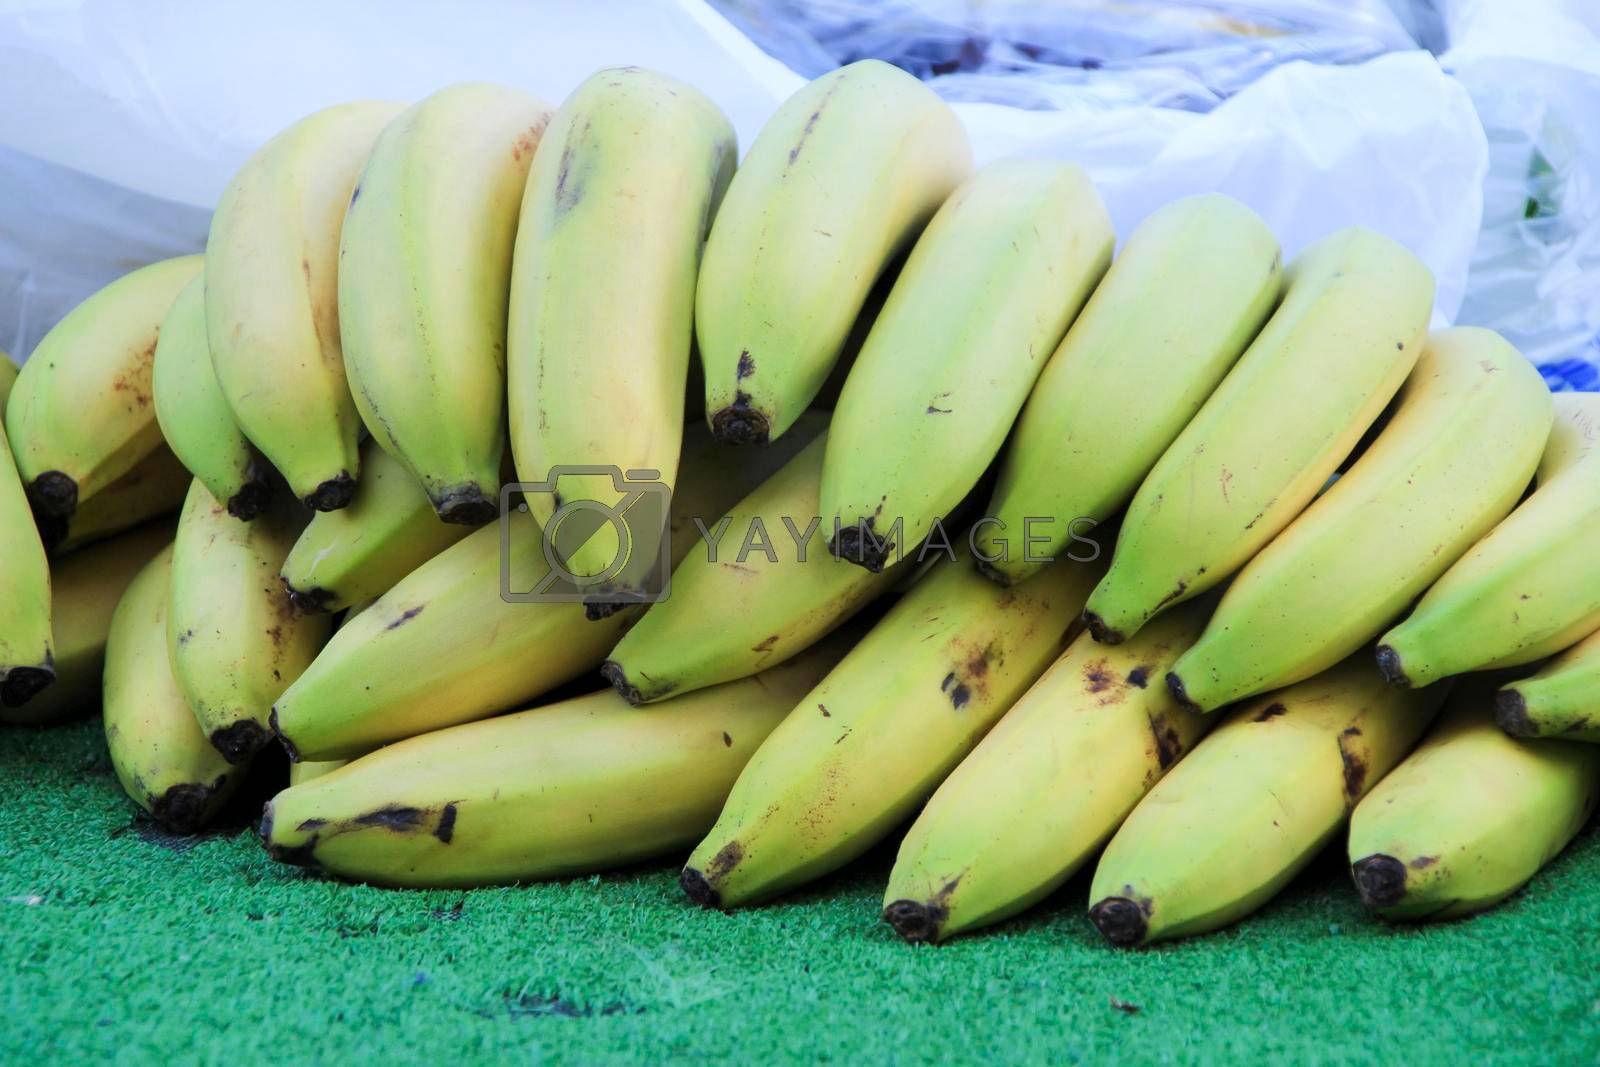 Royalty free image of Colorful bananas at a market stall by soniabonet